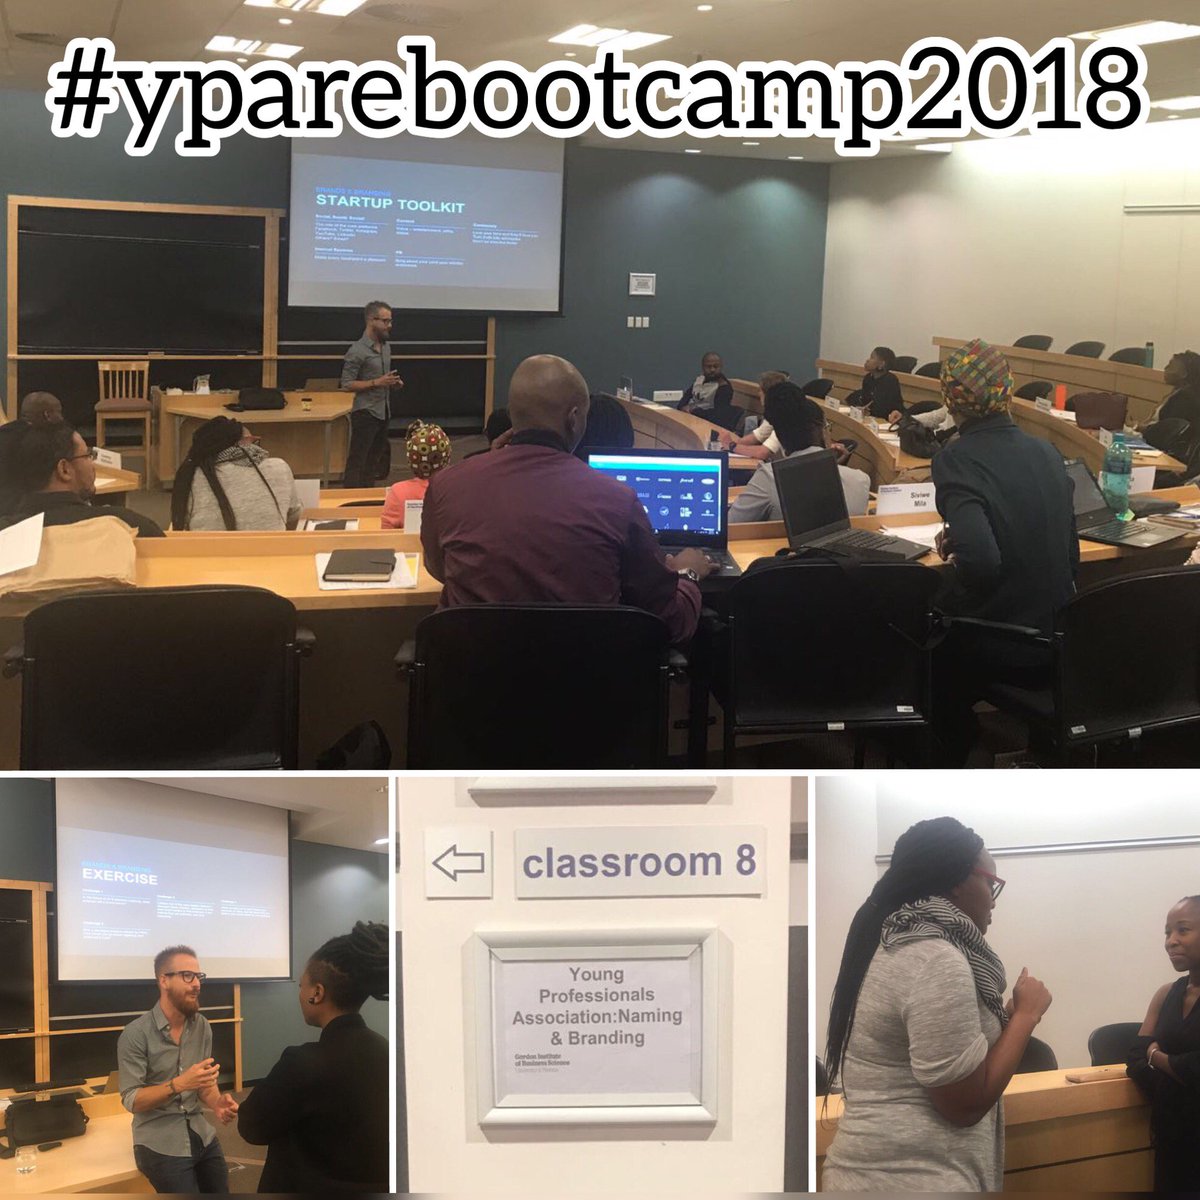 A young #tbt to our #yparebootcamp2018 class yesterday at  @GIBS_SA with @levonrivers on naming and branding. #education #entrepreneurship #smallbusinessdevelopment #ypalive